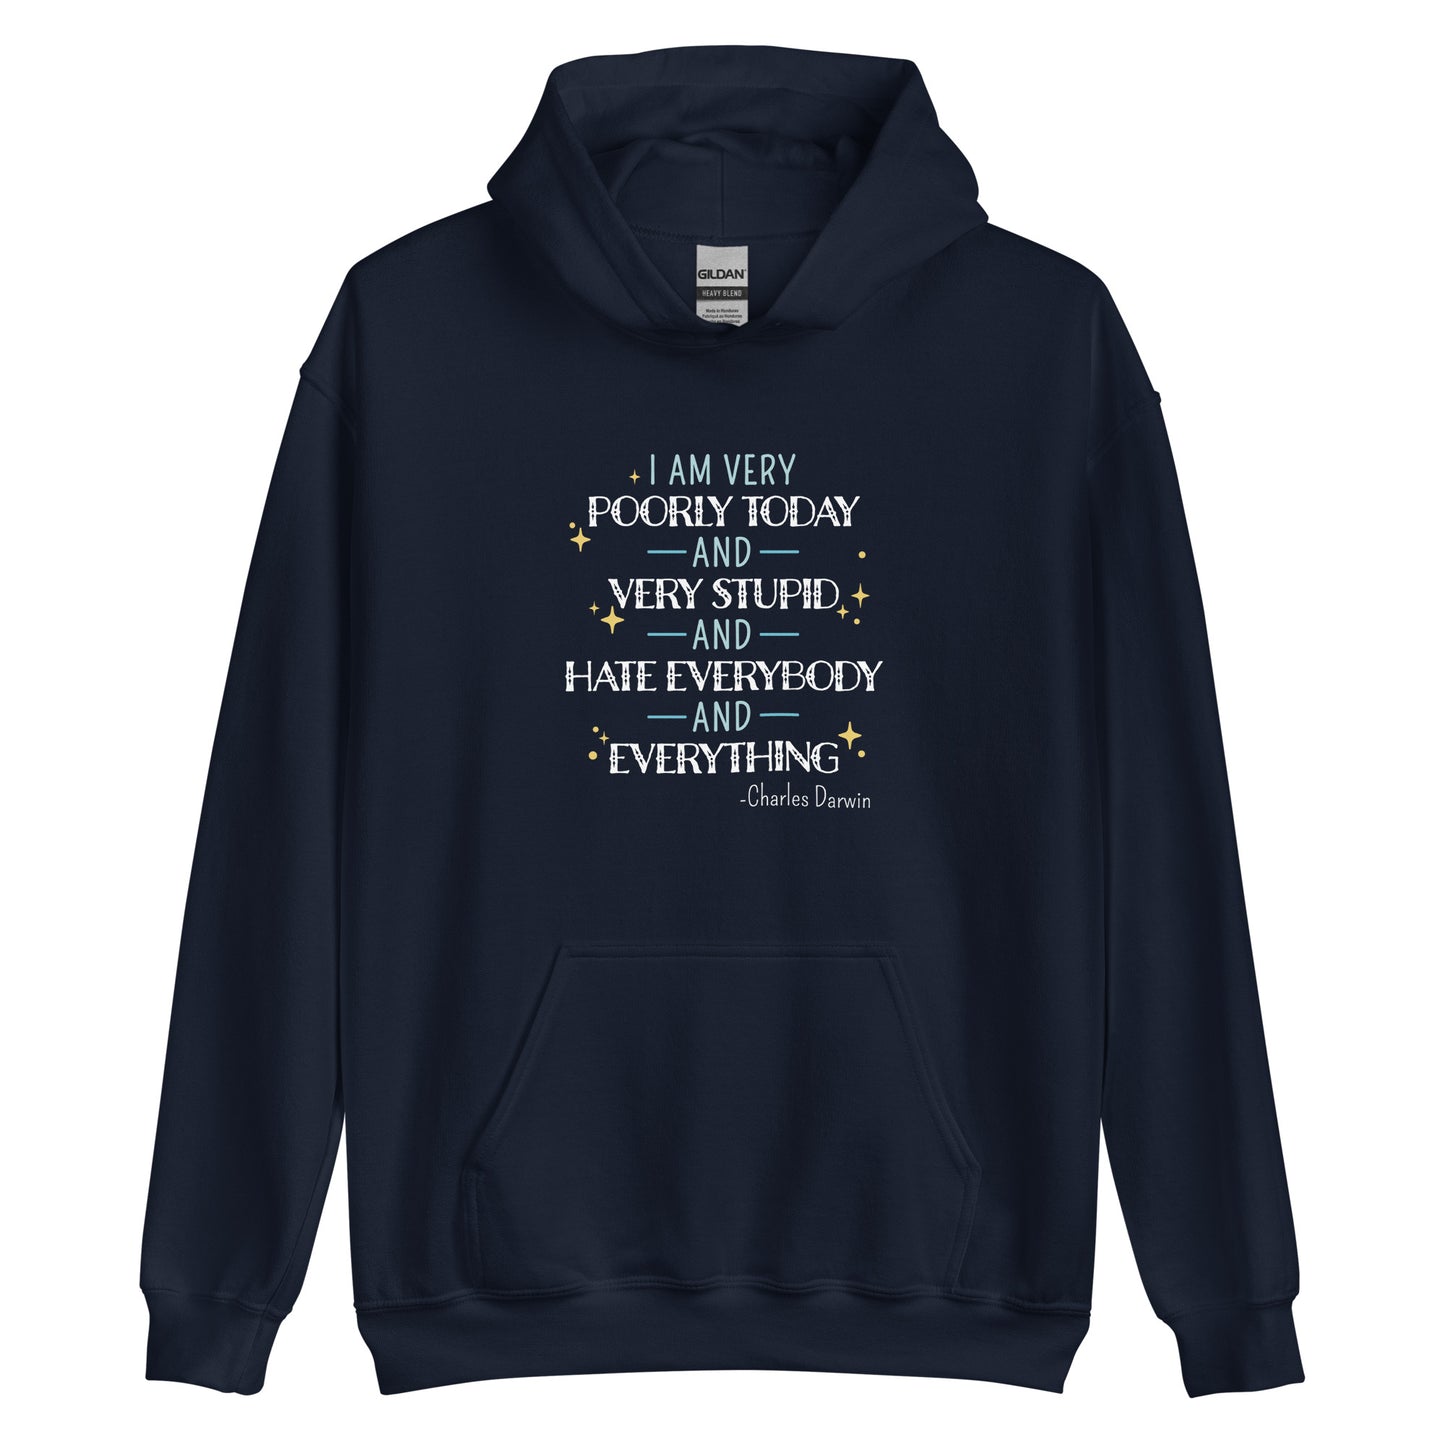 A navy hooded sweatshirt featuring a quote from Charles Darwin in white and blue text. The quote reads "I am very poorly today and very stupid and hate everybody and everything".